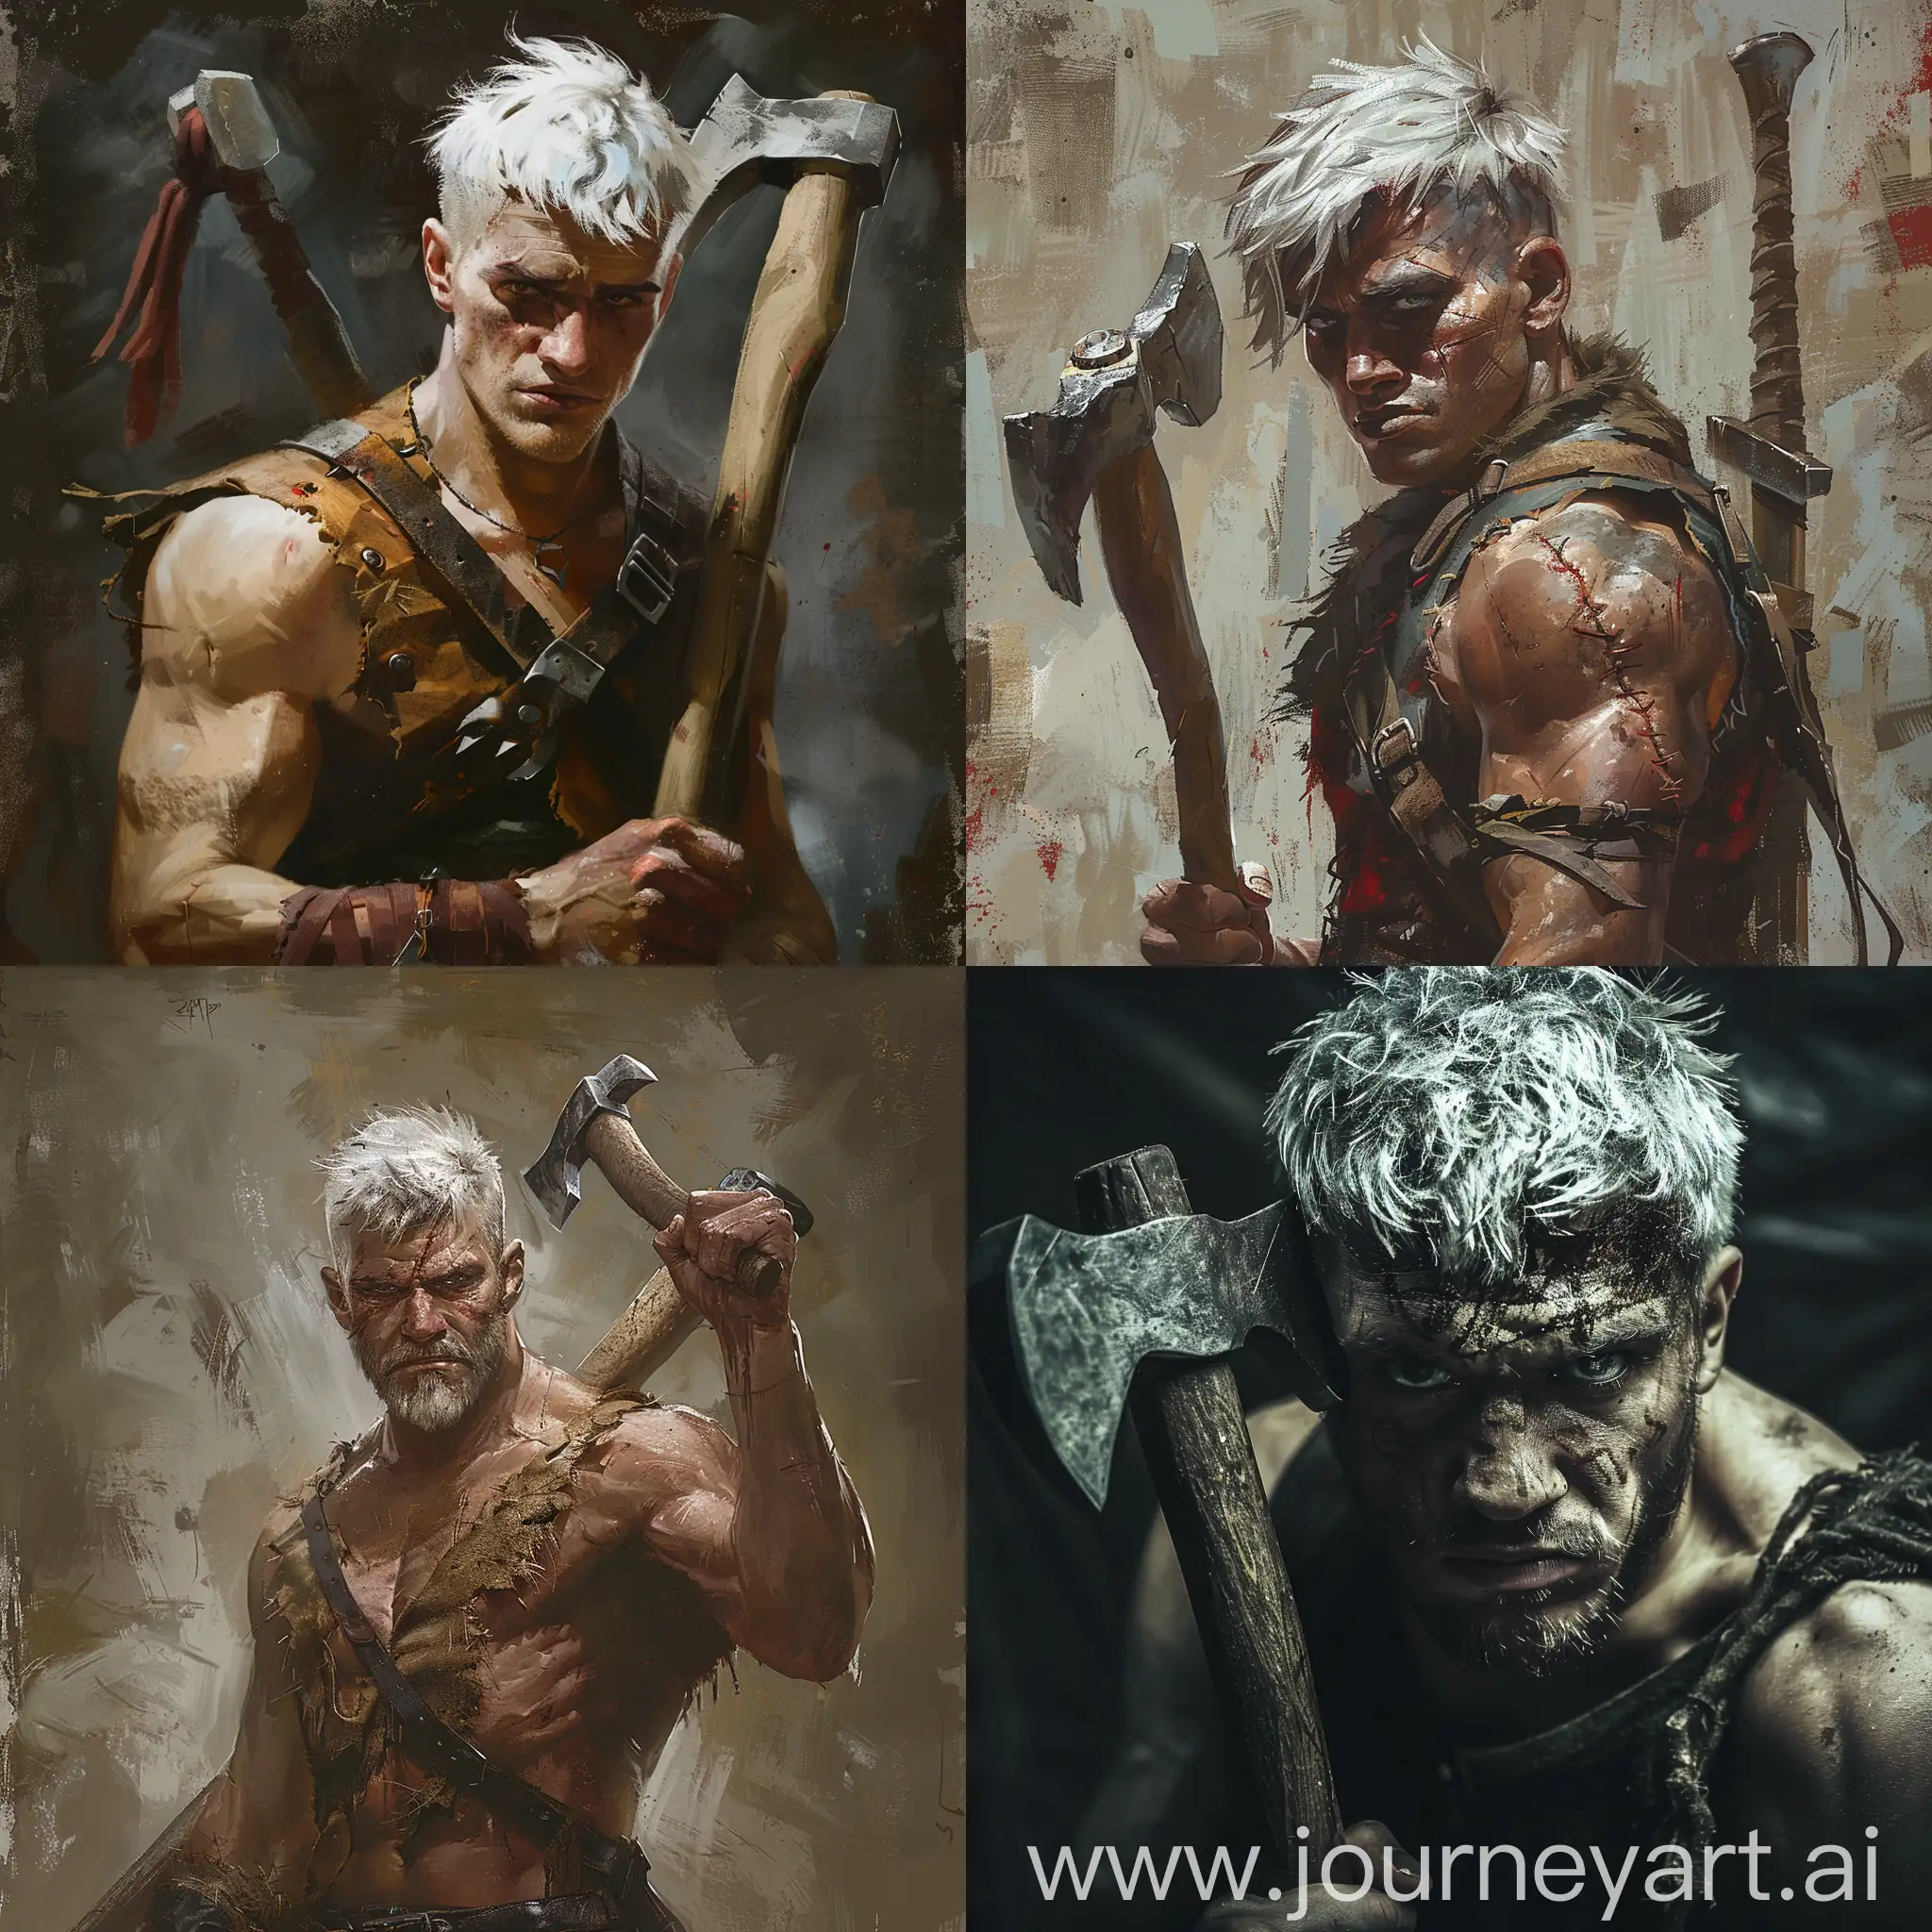 Warrior, menacing face, young, small beard, white hair, man, ax in right hand